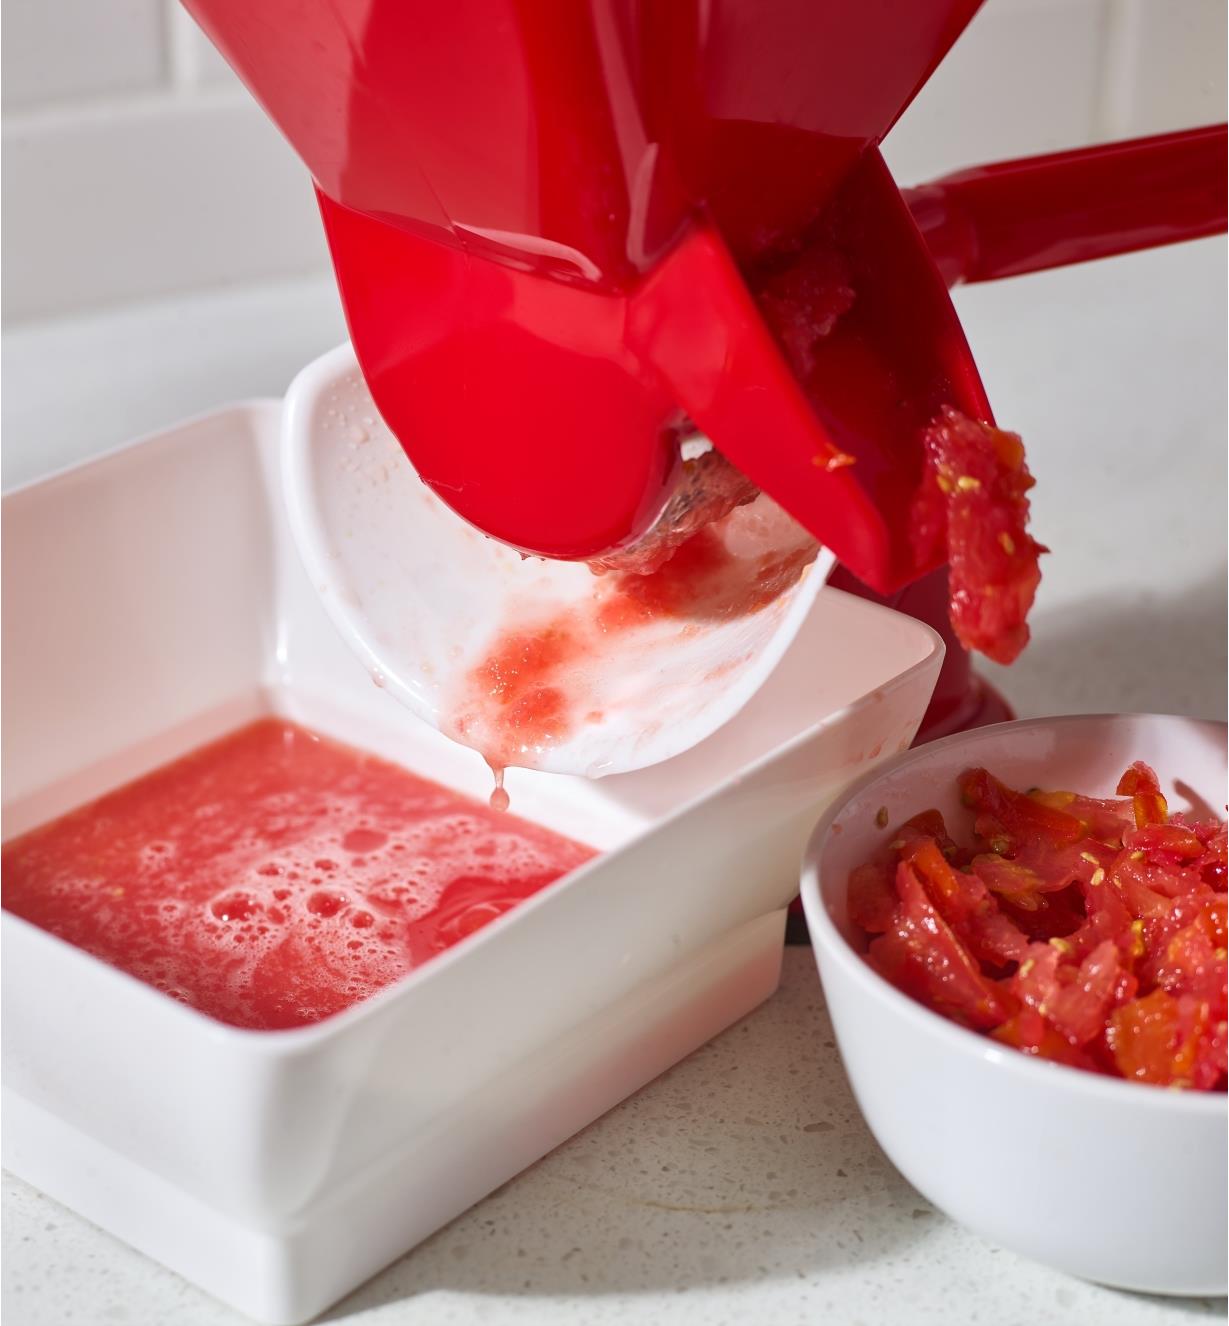 Tomato press sits on a counter with pulp and juice running into the catch bowls